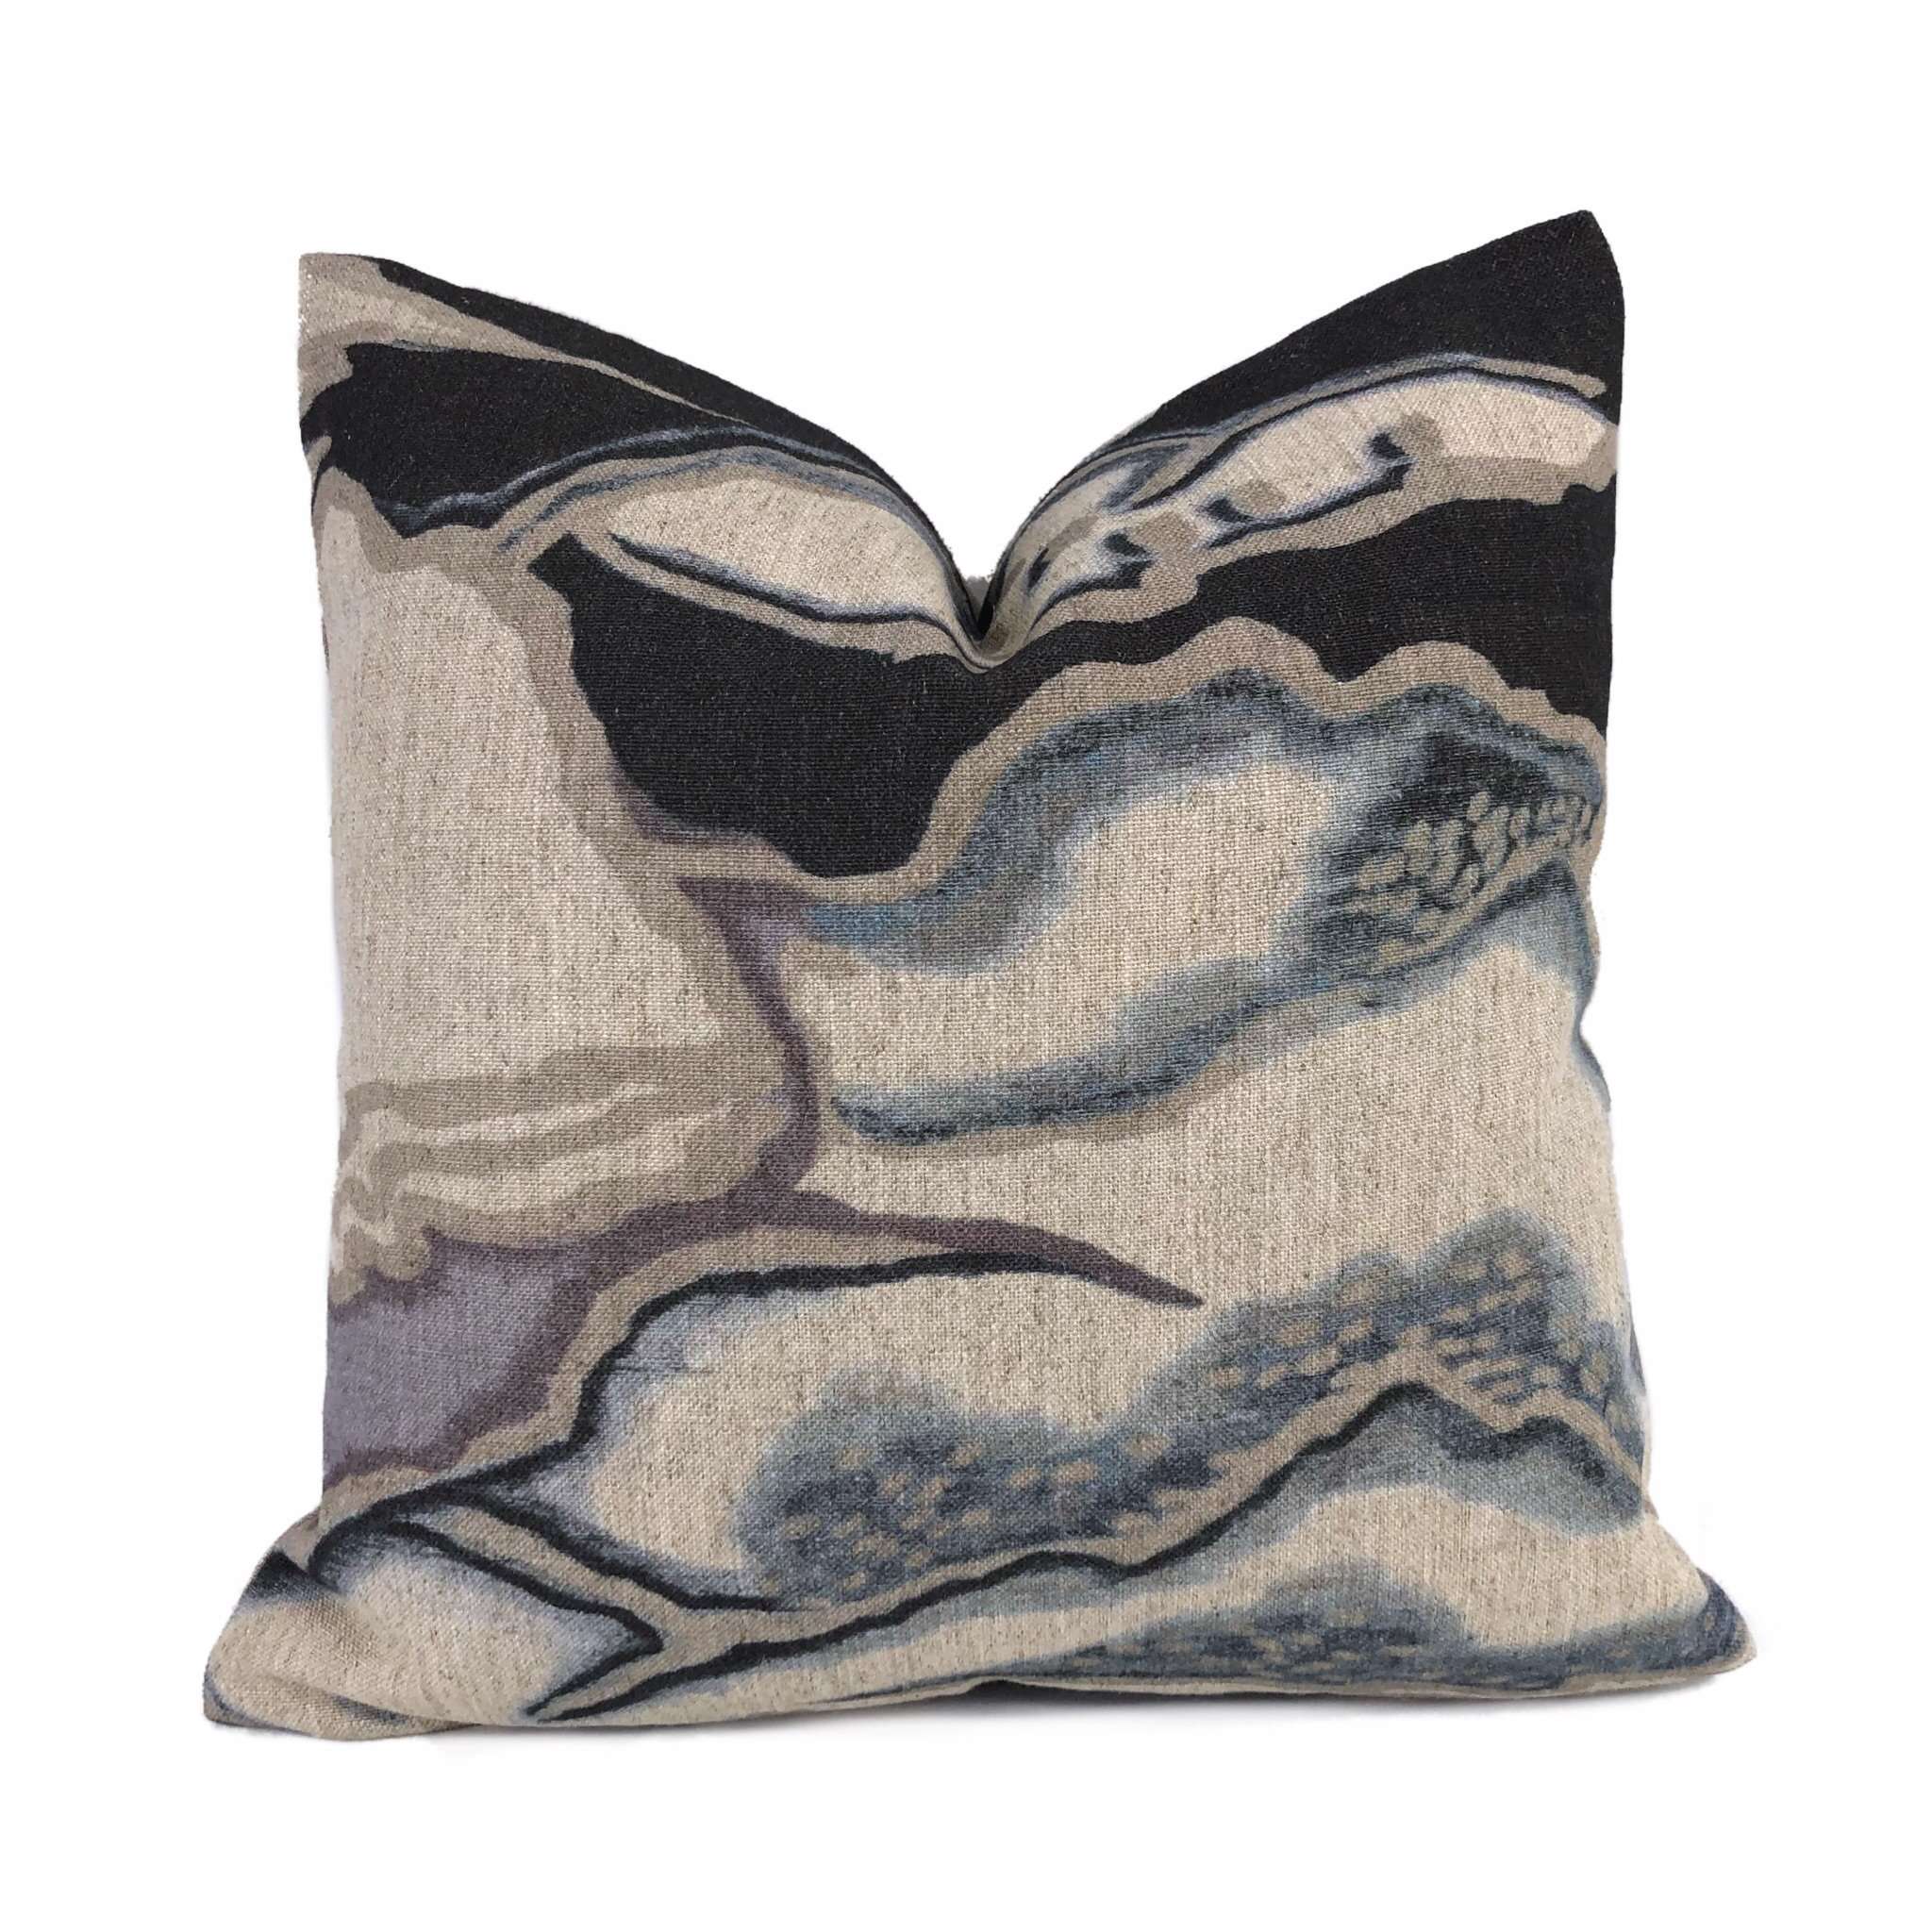 https://www.aloriam.com/cdn/shop/products/robert-allen-chattingham-mussel-shell-abstract-pictorial-pillow-cover-by-aloriam-13597725_1024x1024@2x.jpg?v=1571439472